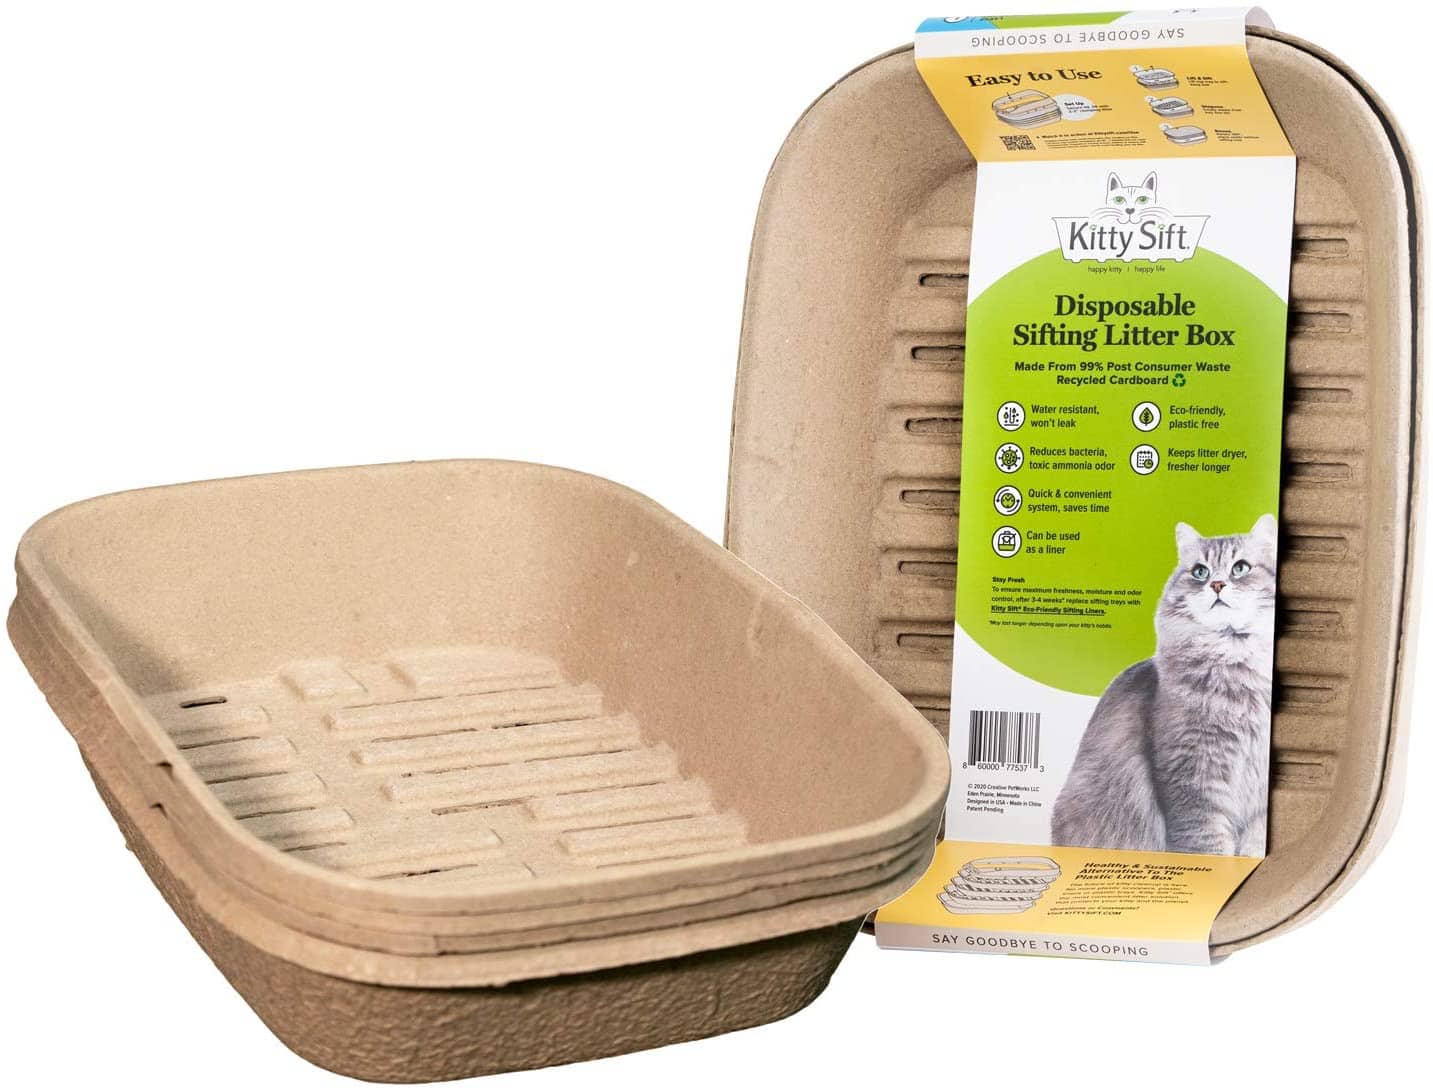 Kitty Sift Disposable Sifting Litter Box and Liners (1)